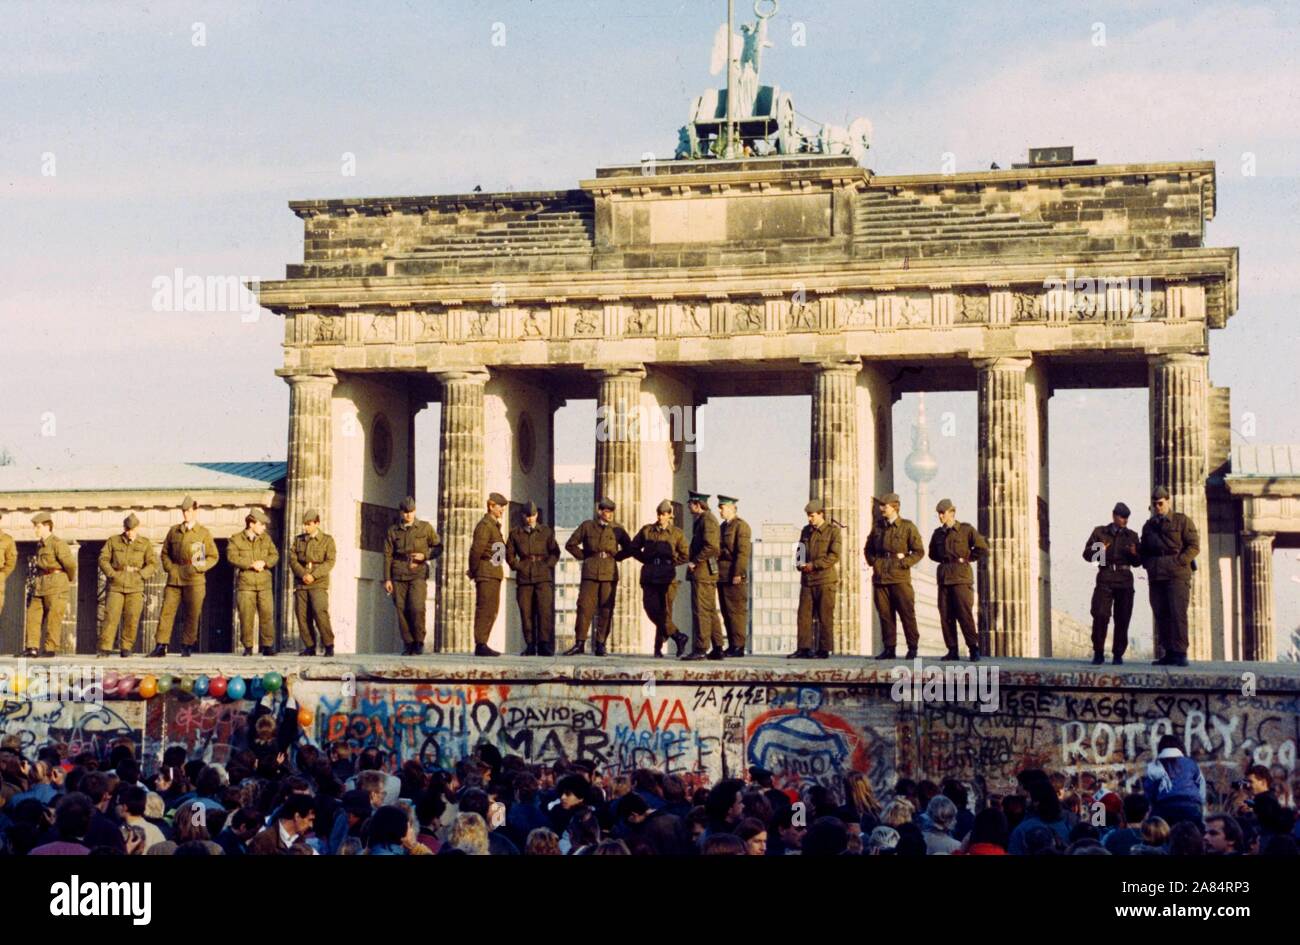 GDR border forces stand on top of the Berlin Wall, Germany, 11 November 1989. The Wall was opened in the night 09/10 November. (dpa / IPA / Fotogramma, Berlin - 2014-10-17) ps the photo is usable in respect of the context in which it was taken, and without defamatory intent of the decorum of the people represented Editorial Usage Only Stock Photo